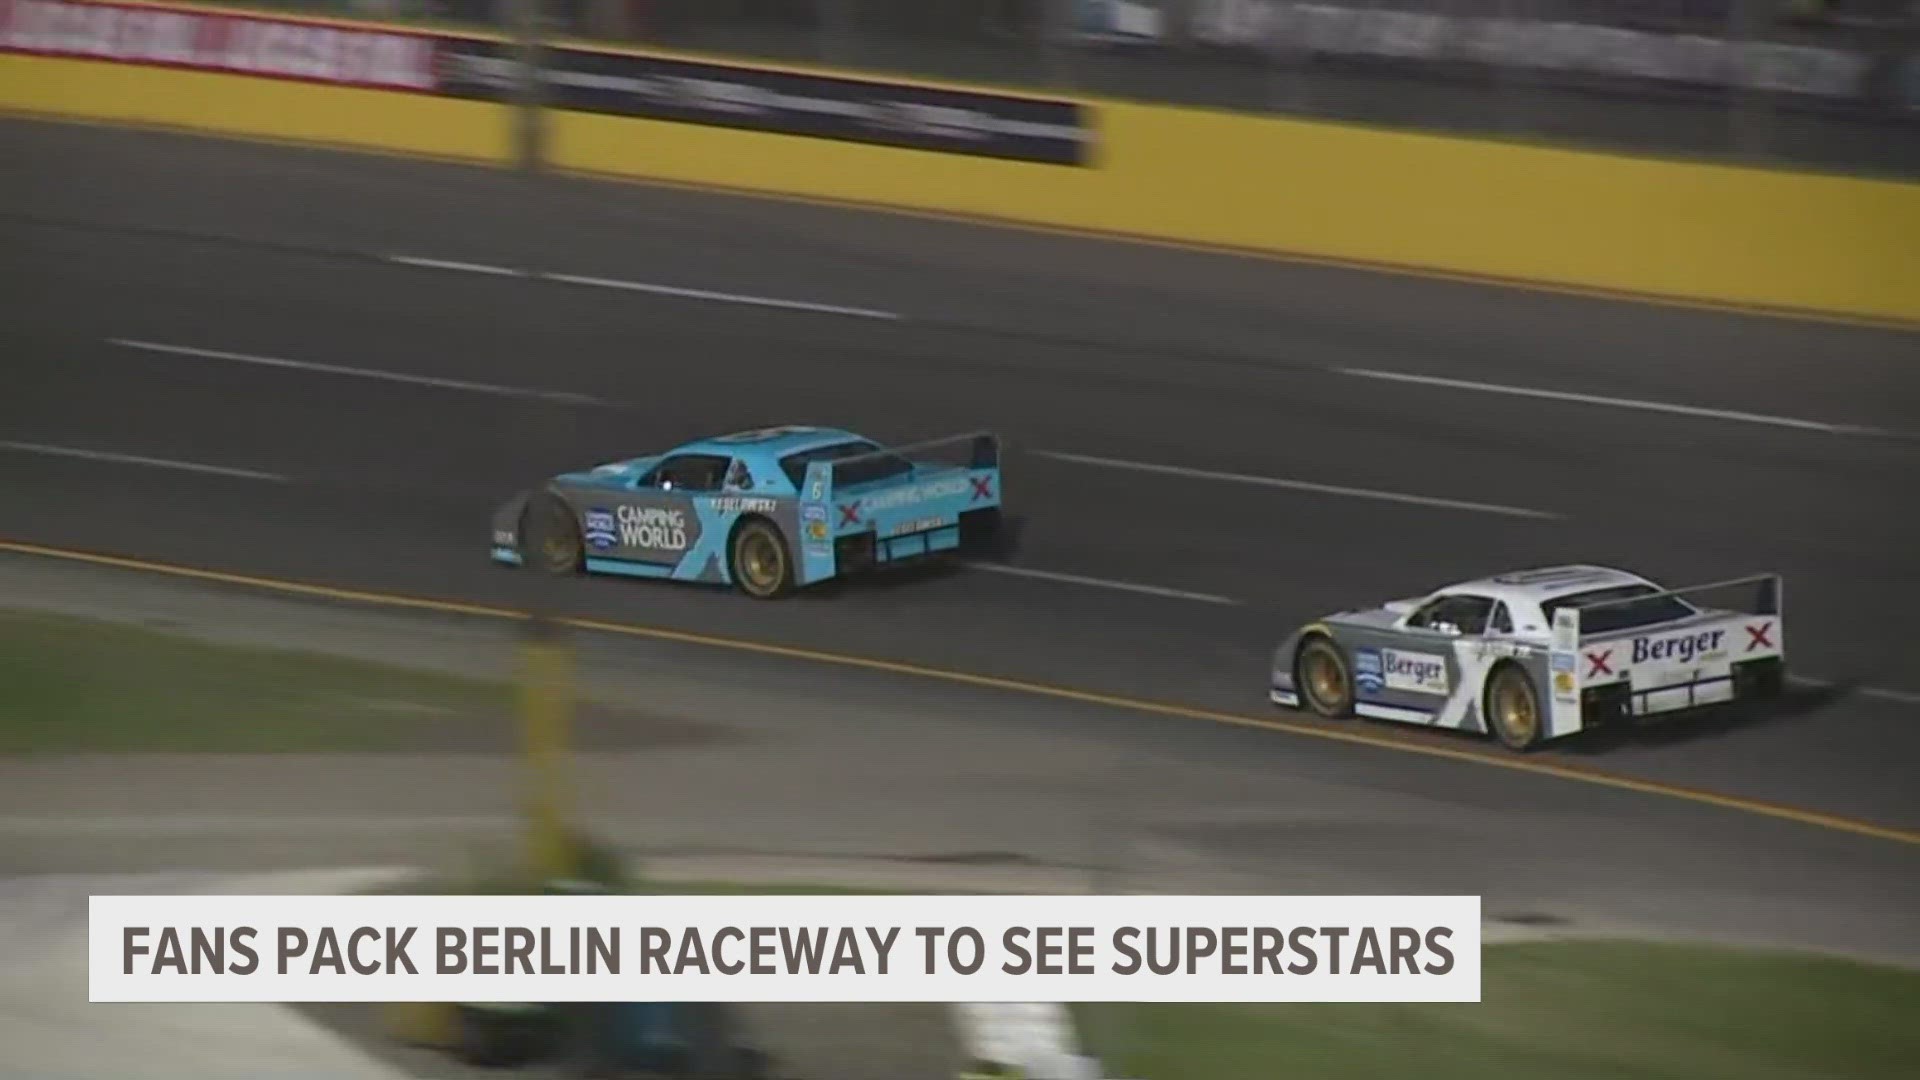 Things didn't go according to plan due to the weather, but the Superstar Racing Experience still put on a show at Berlin Raceway.